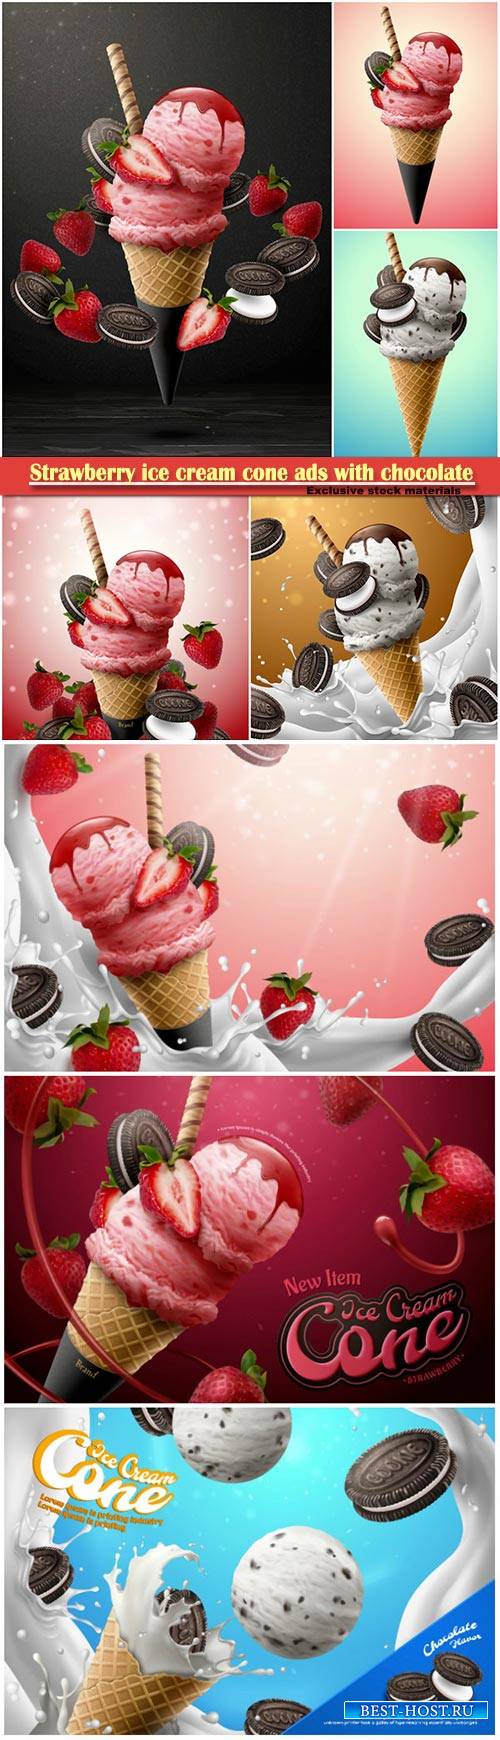 Strawberry ice cream cone ads with chocolate cookie and fresh fruit on glittering pink background, 3d illustration